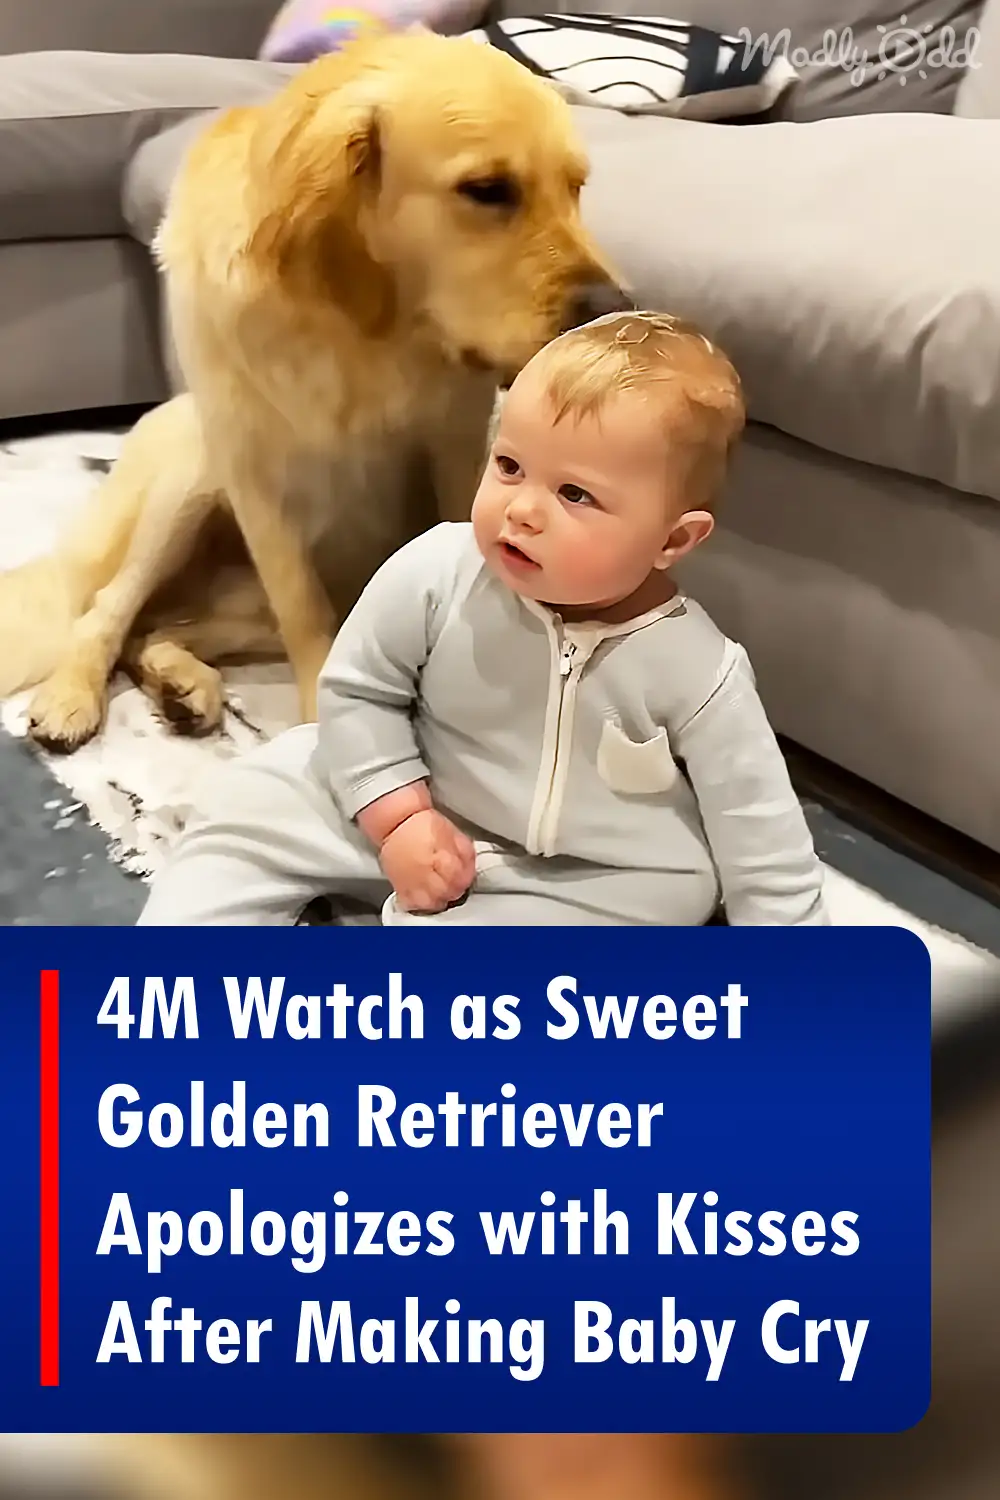 4M Watch as Sweet Golden Retriever Apologizes with Kisses After Making Baby Cry